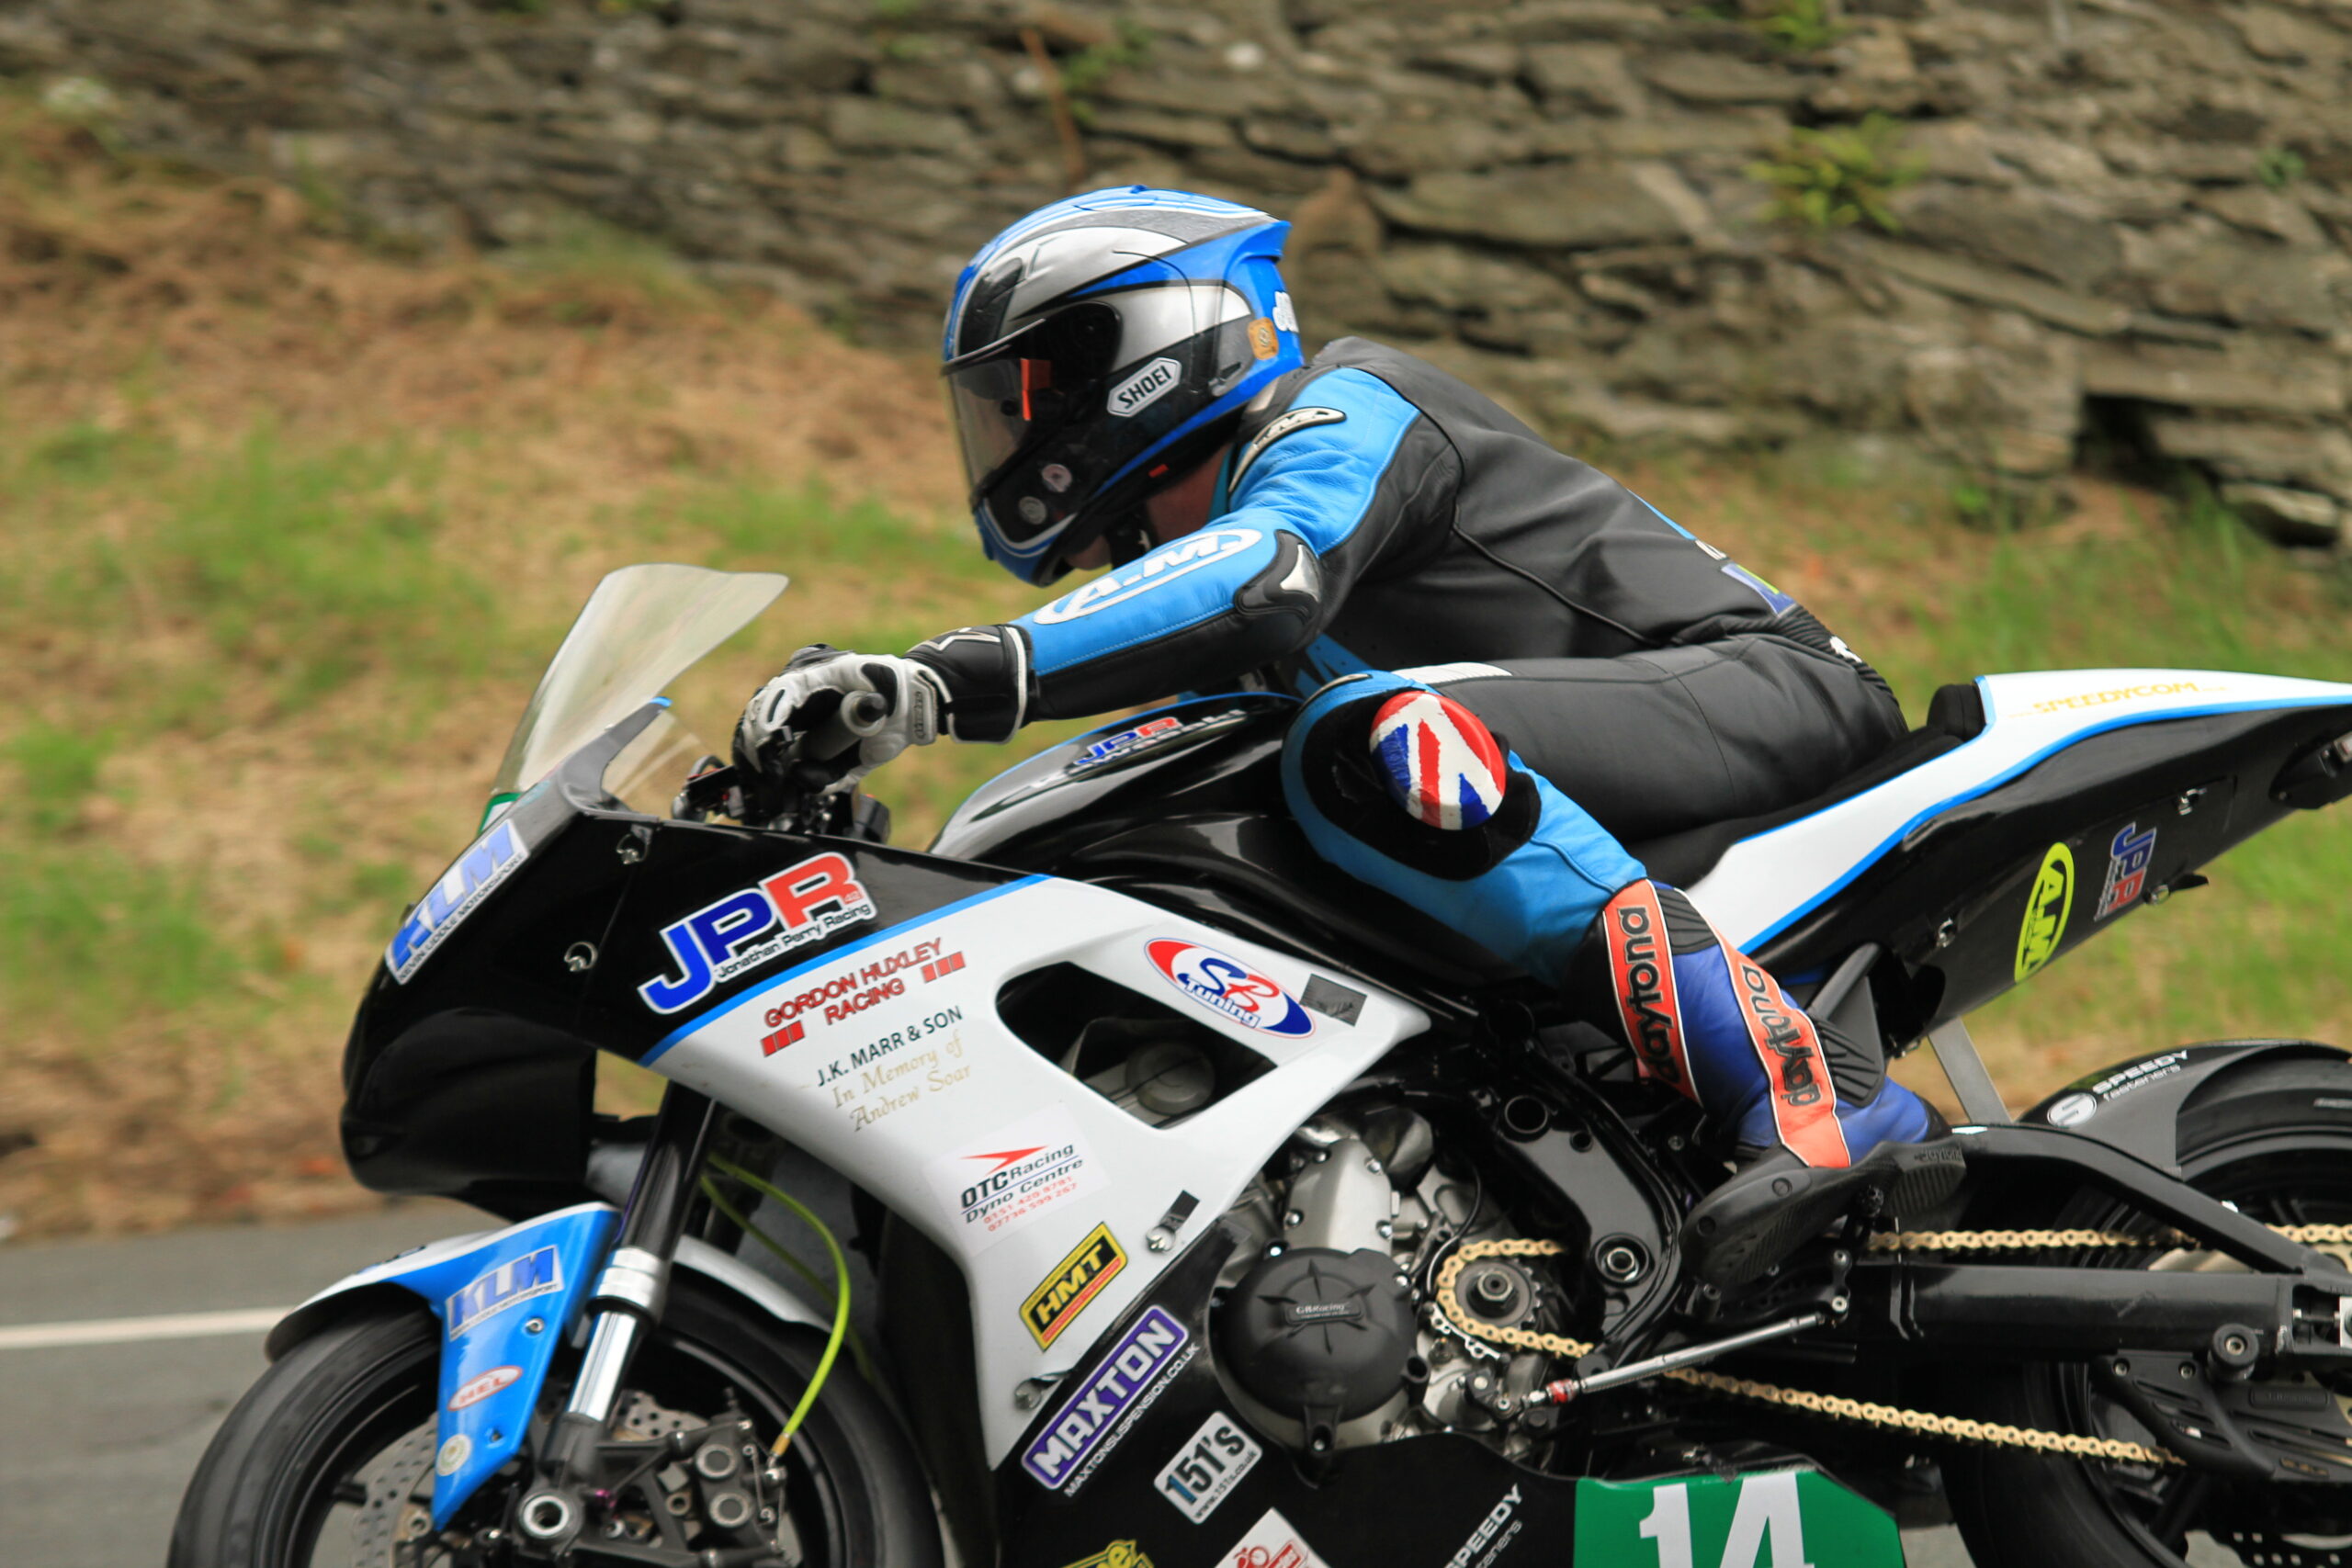 Jonathan Perry Aiming To Push For More Golden Manx GP Feats